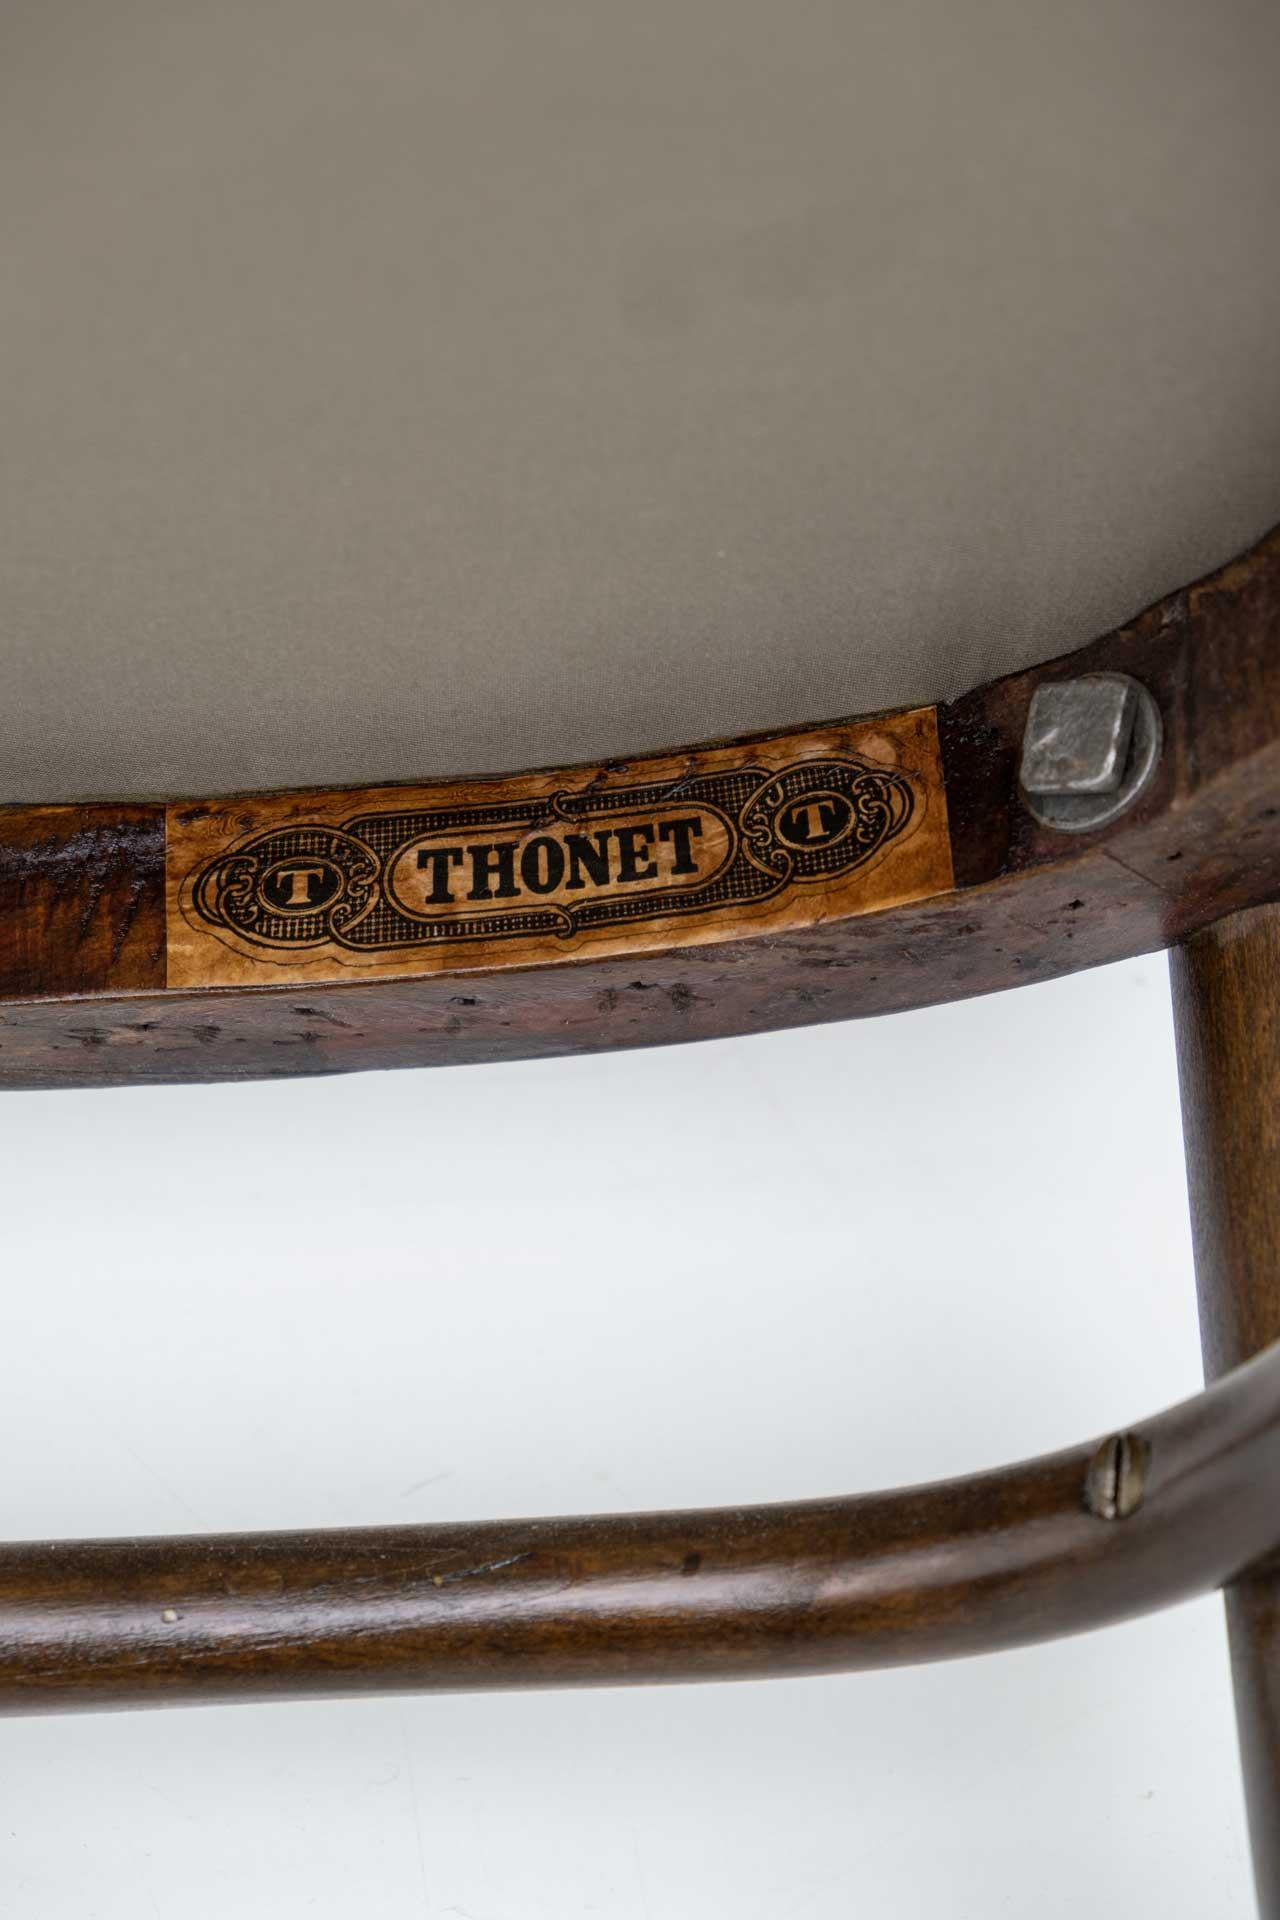 Thonet Austrian Curved Wood Armrests Chair, 1920s For Sale 2